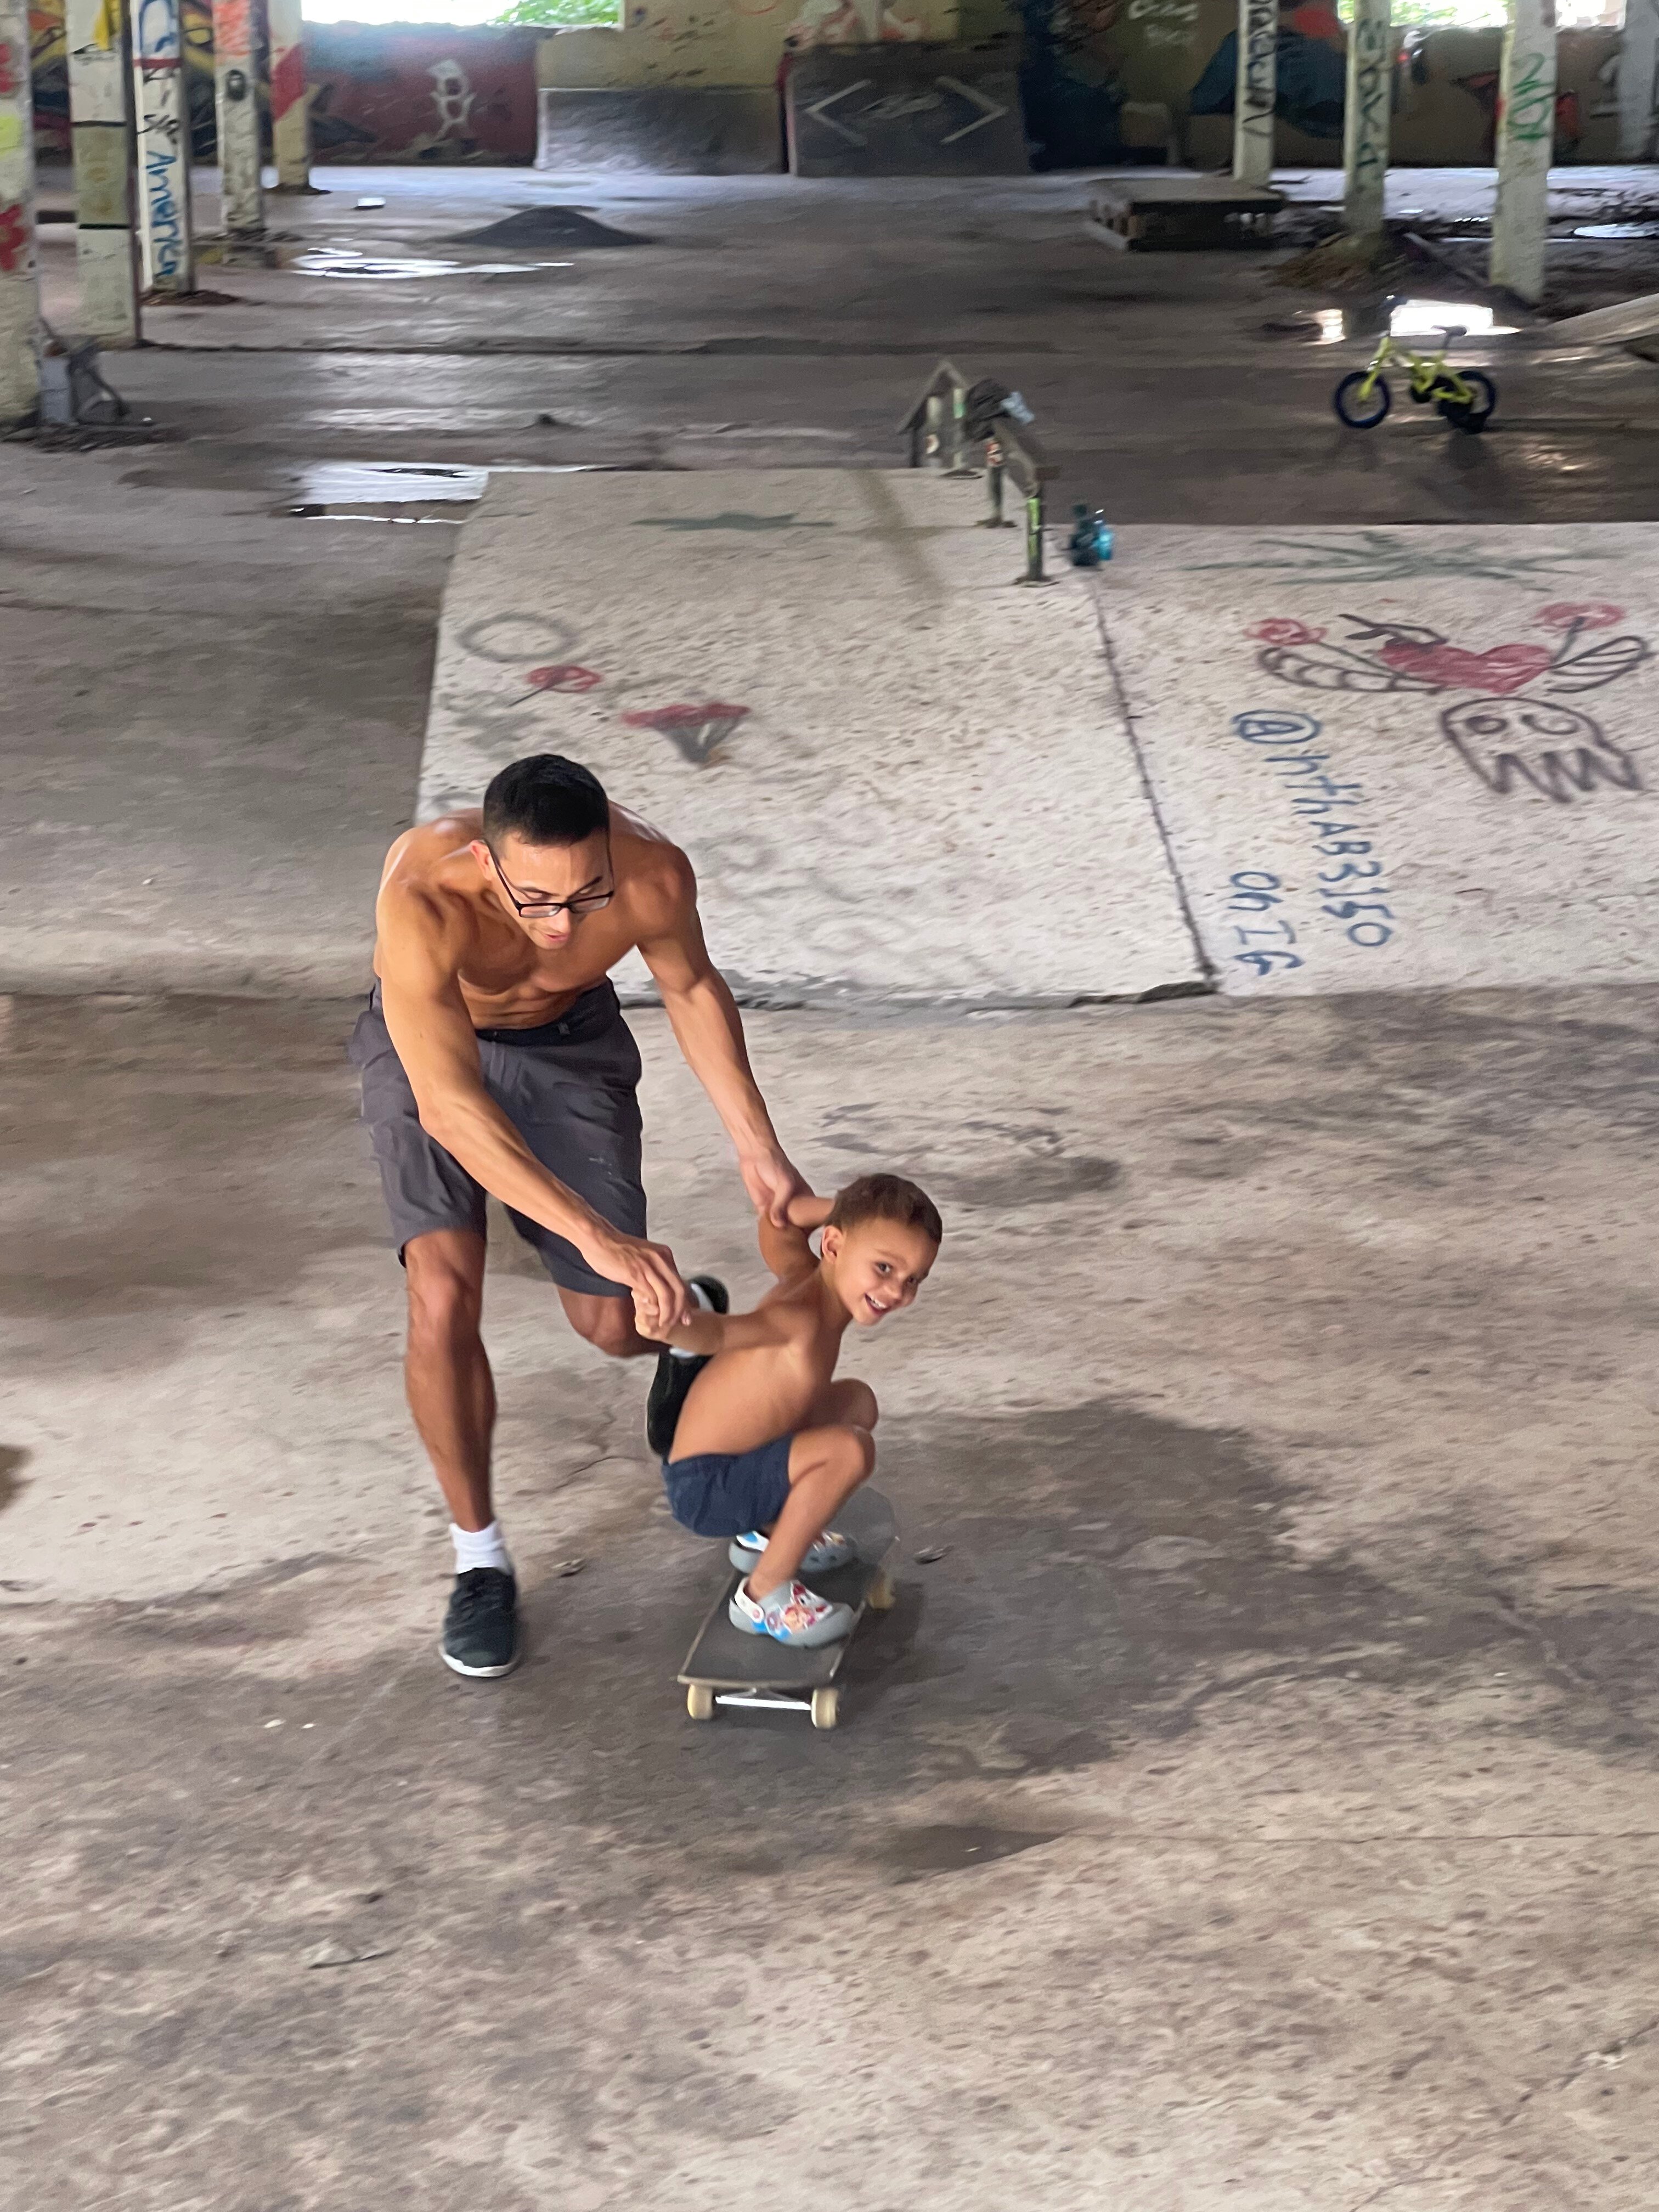 Skate dad Adam Pantin showing his son the ropes at The Warehouse in Chaguaramas